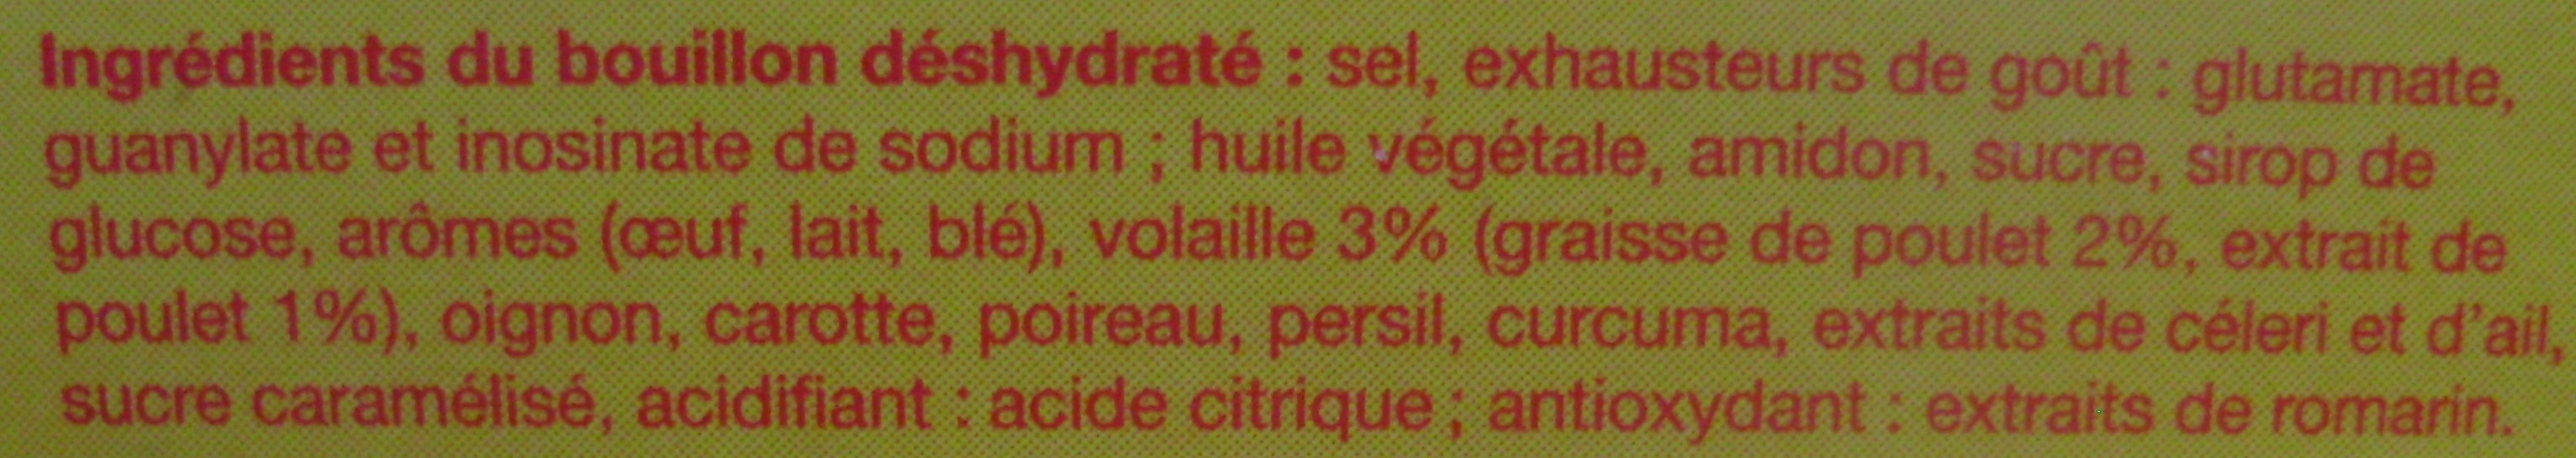 BouillonKub Volaille (x 8) - Ingredients - fr